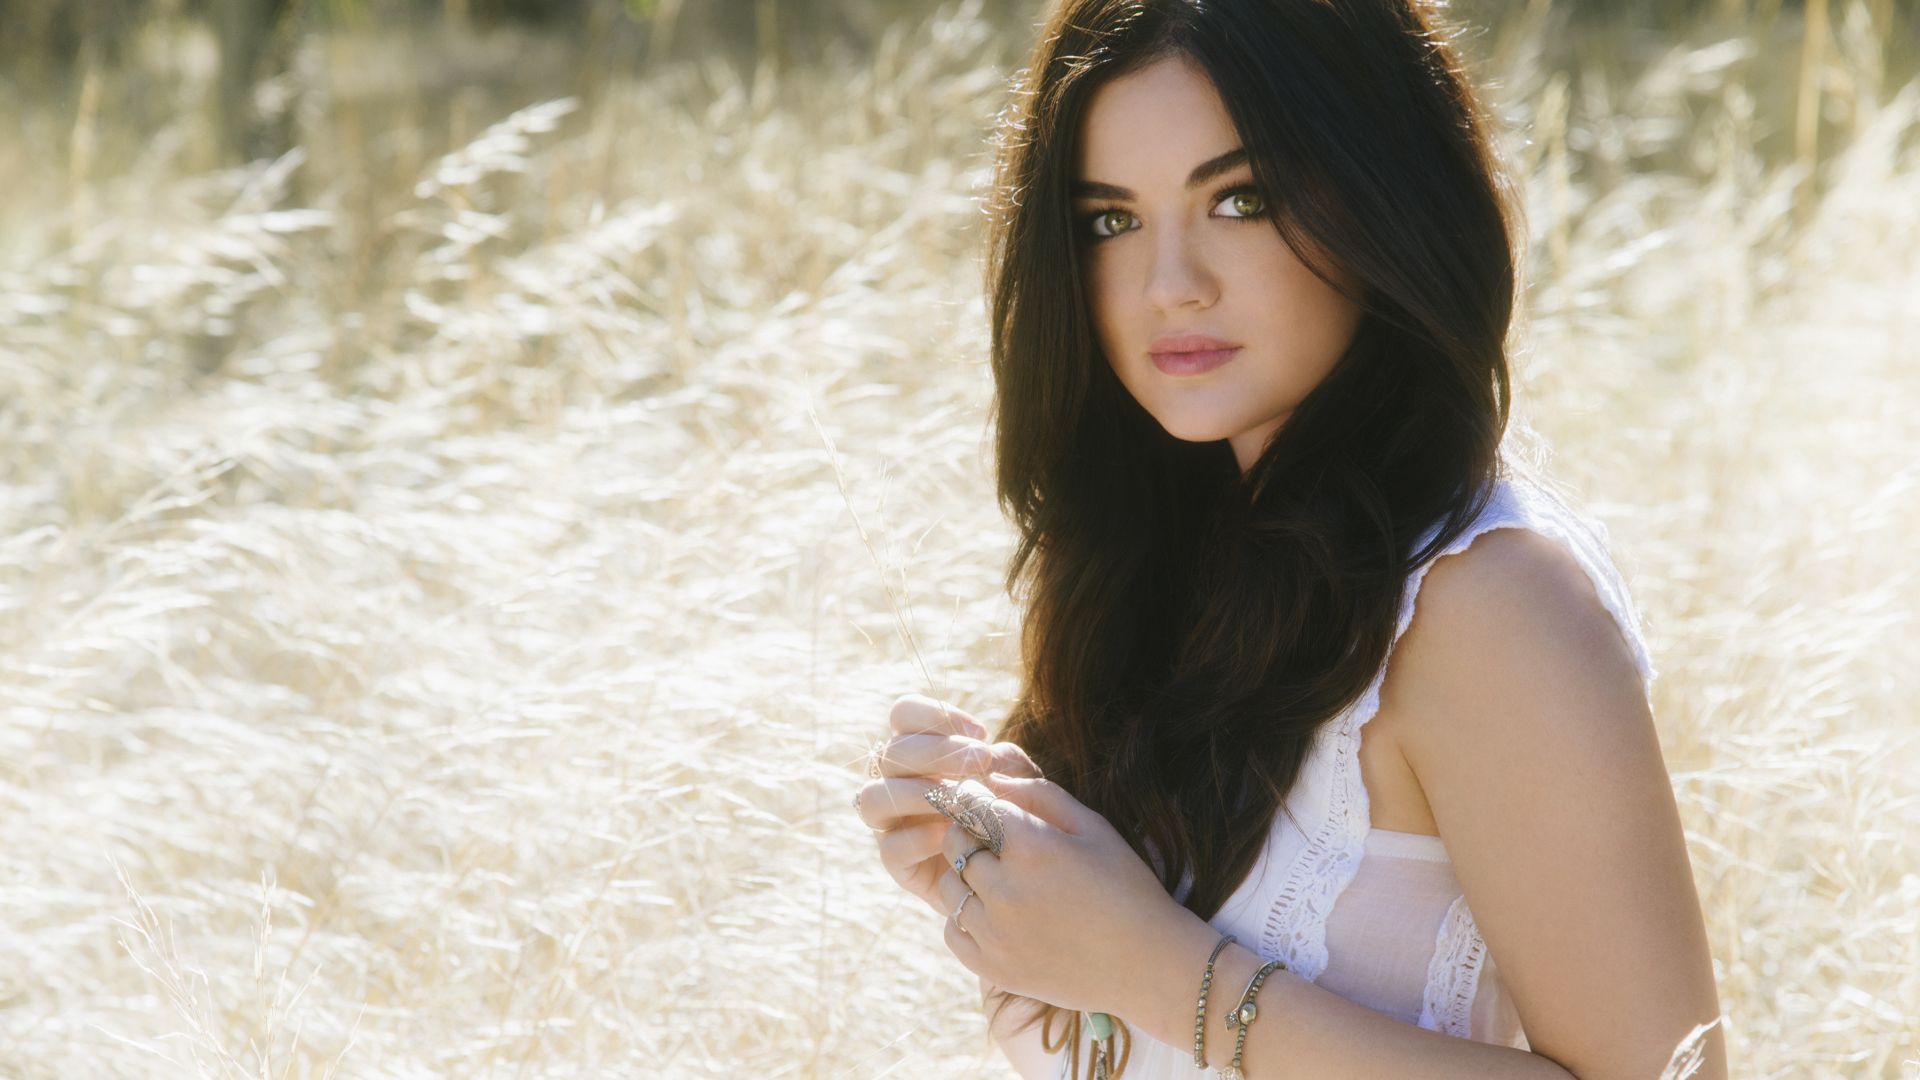 Lucy Hale, Top Fashion Models, model, actress (horizontal)